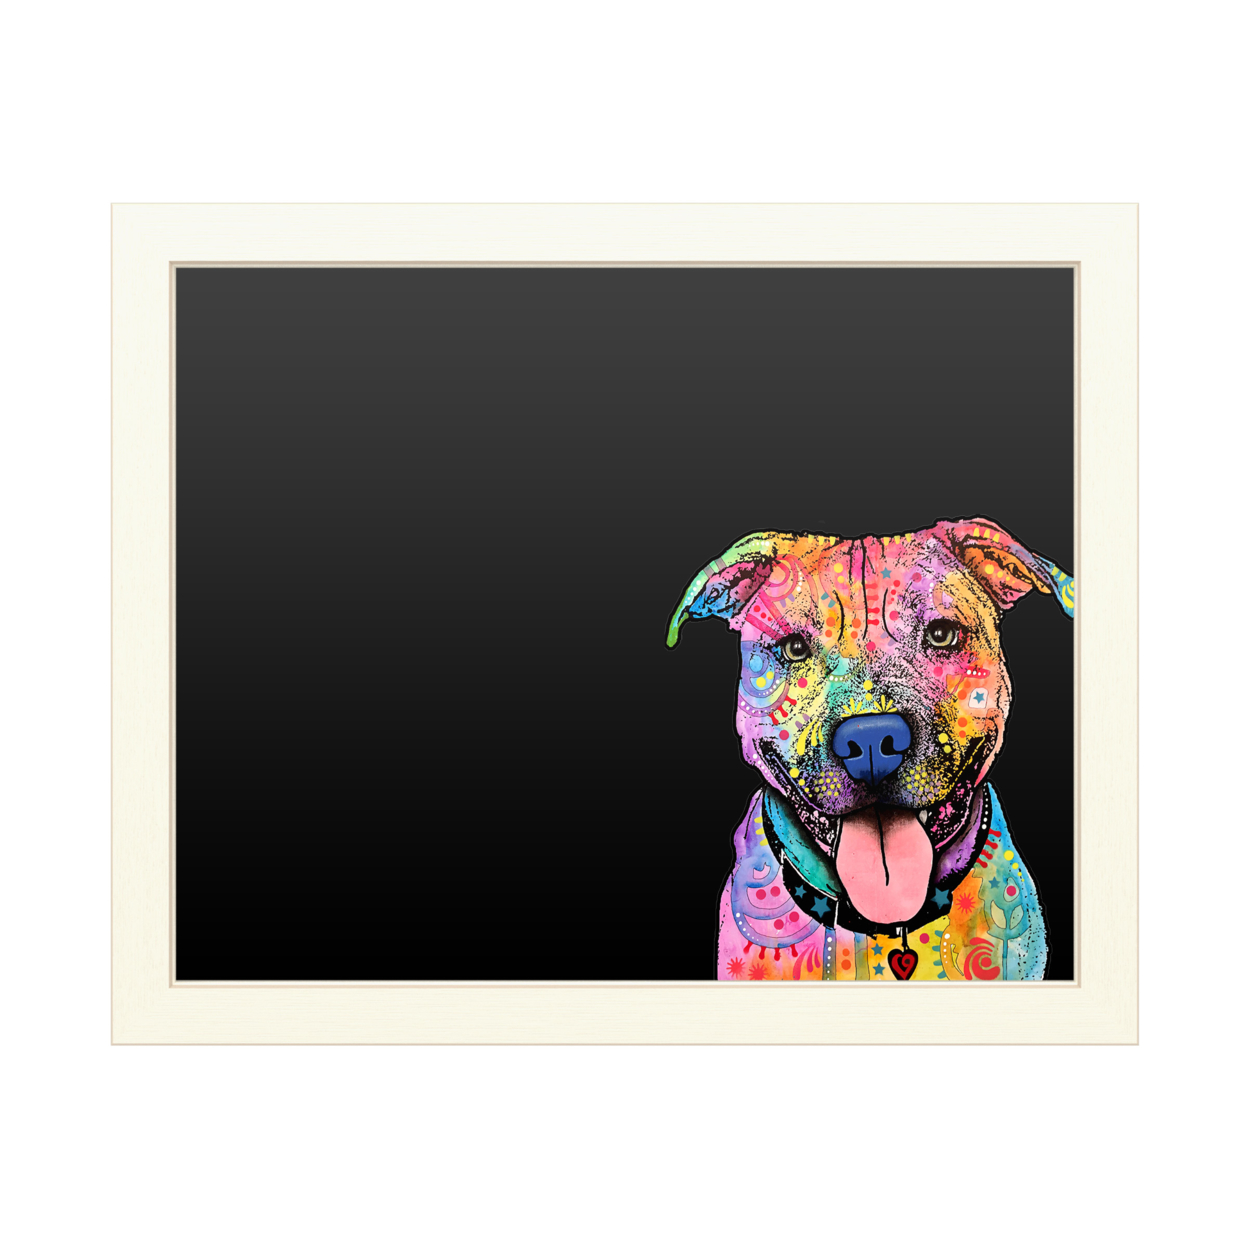 16 X 20 Chalk Board With Printed Artwork - Dean Russo Best Dog White Board - Ready To Hang Chalkboard